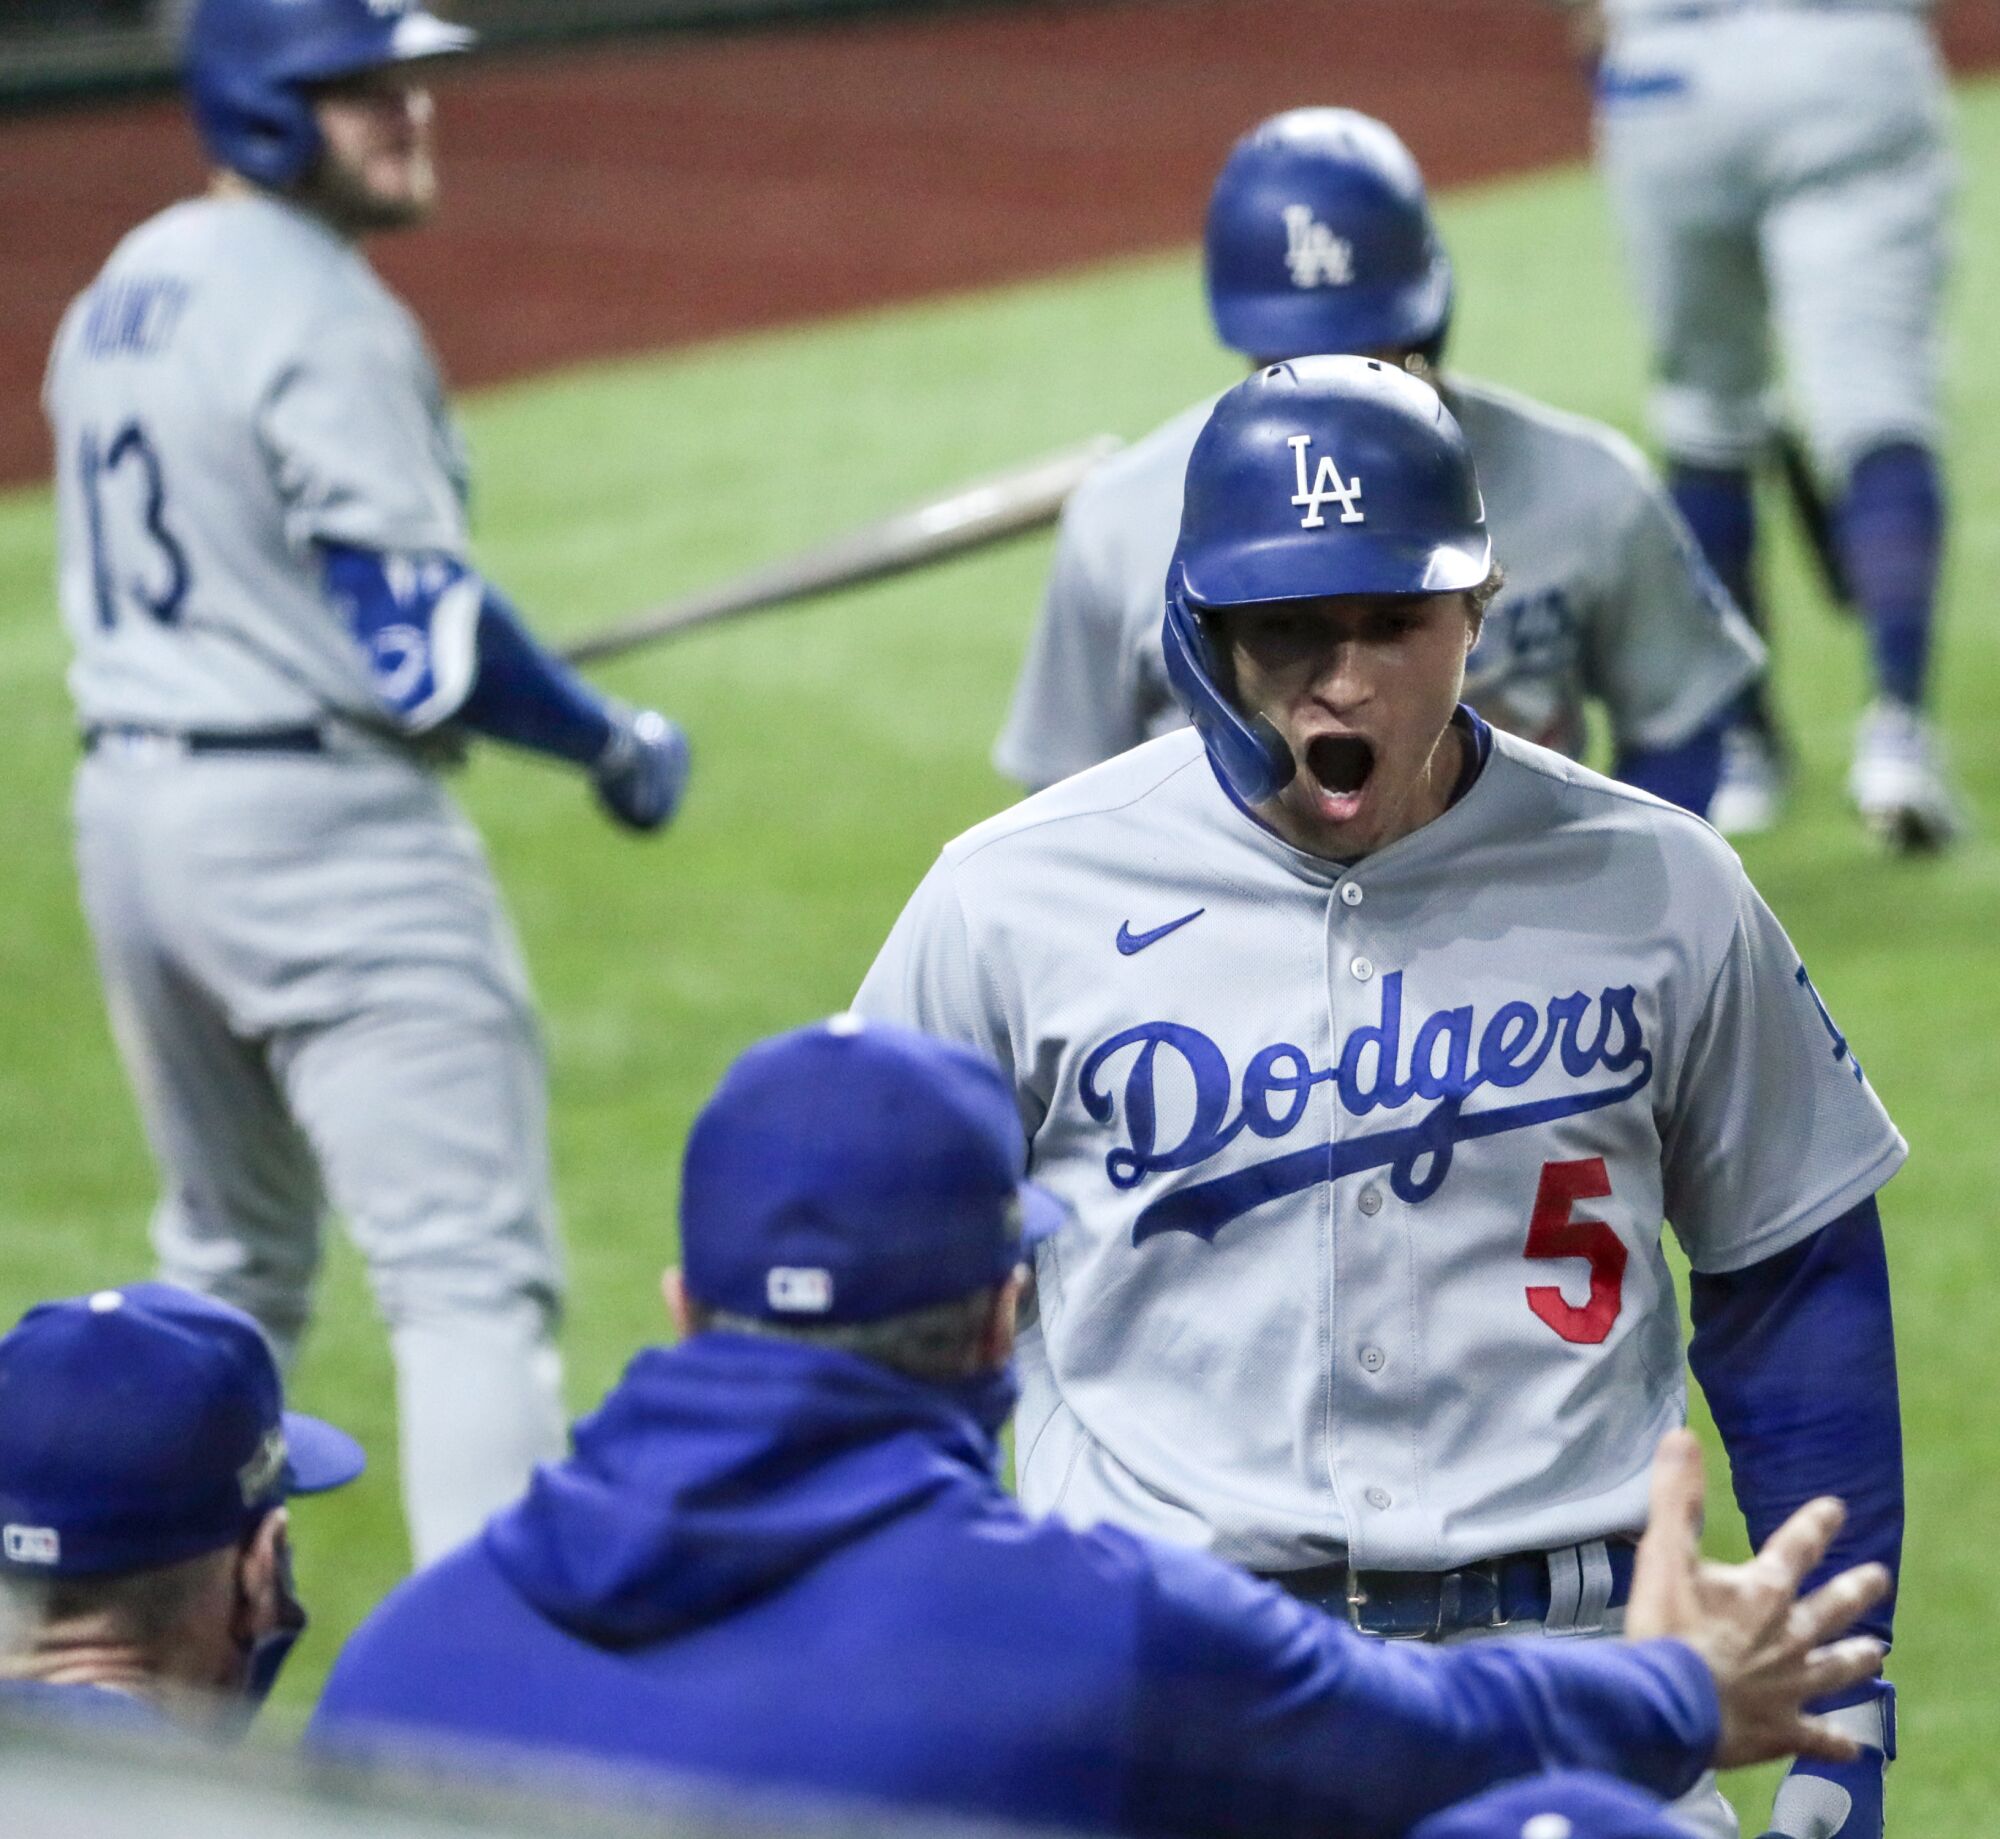 Dodgers shortstop Corey Seager celebrates after hitting a two-run home run in the seventh inning.